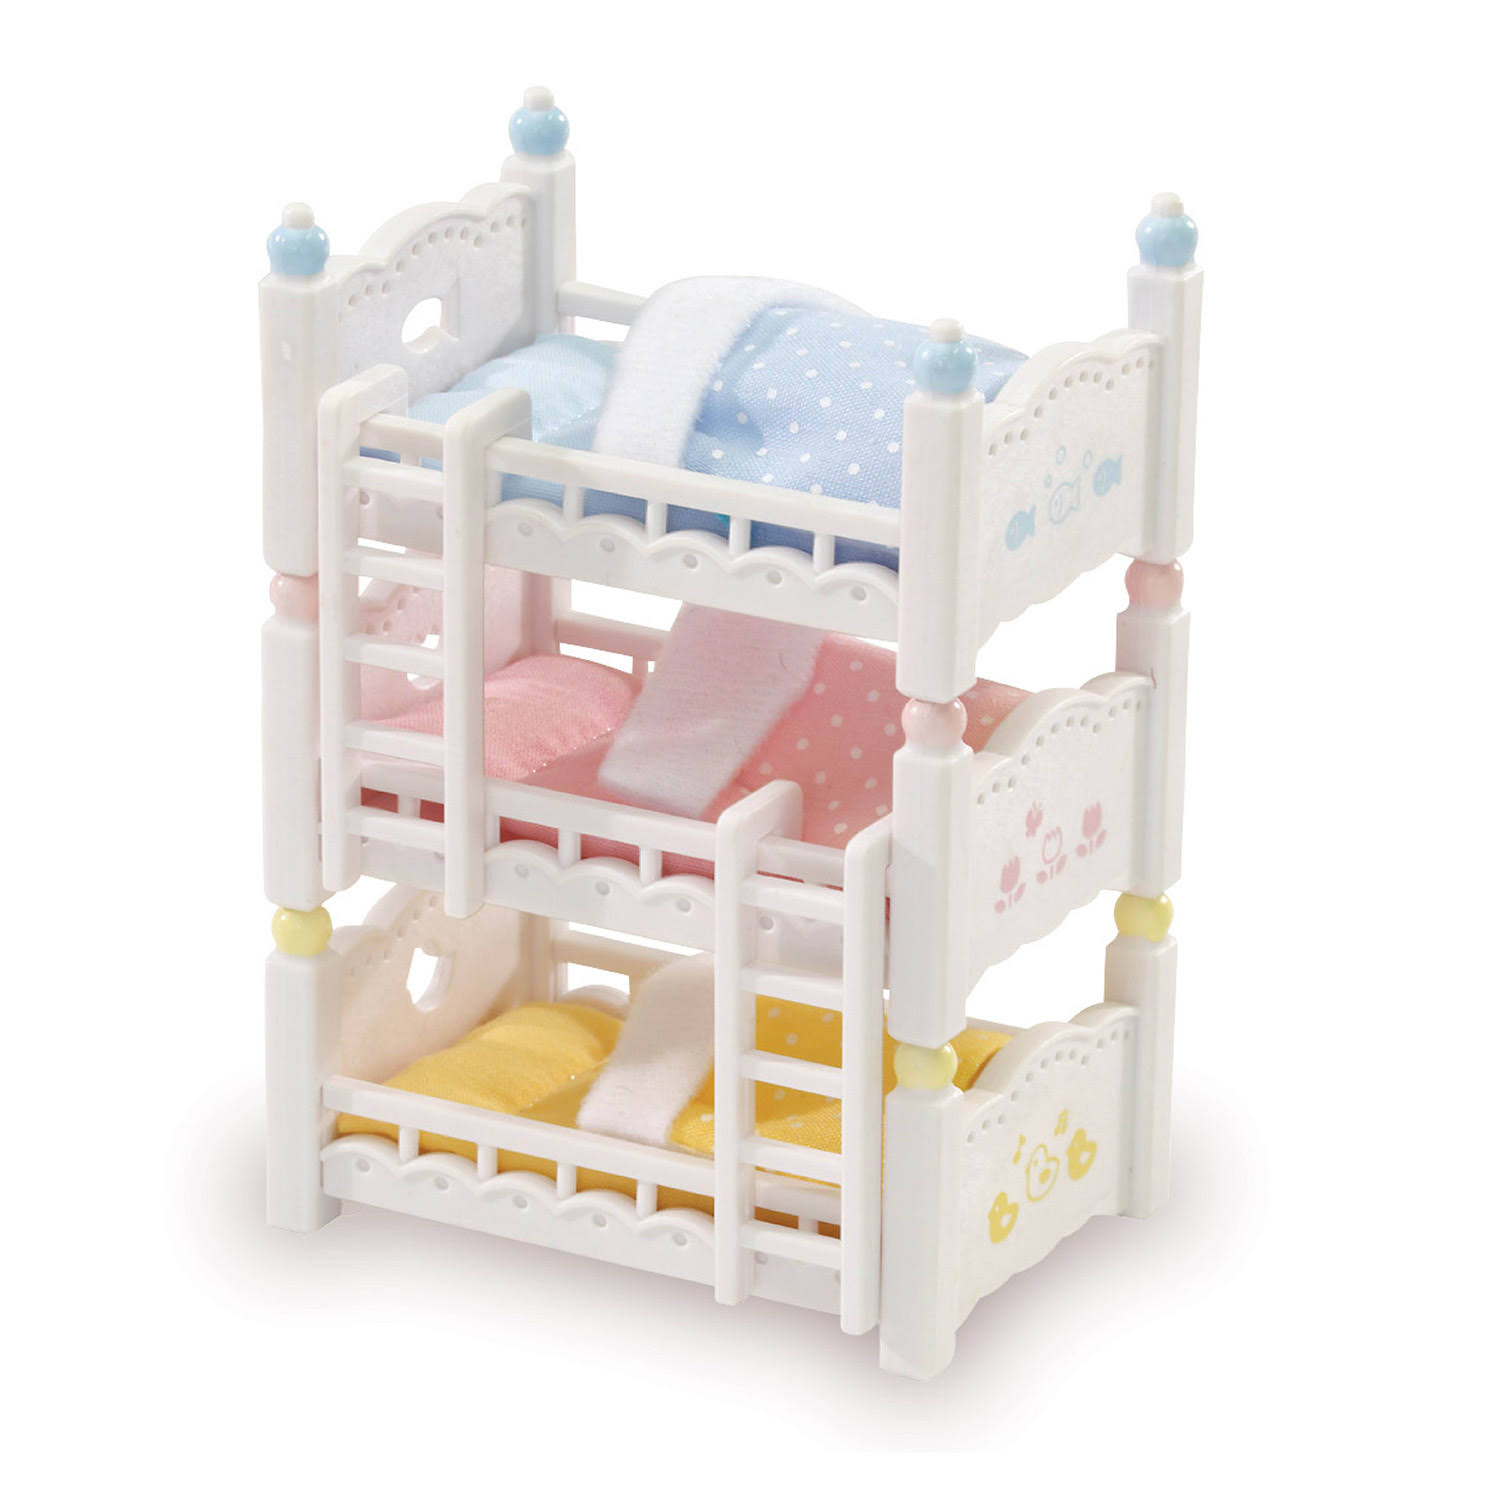 Calico Critters Baby Bunk Beds - 3 Pack